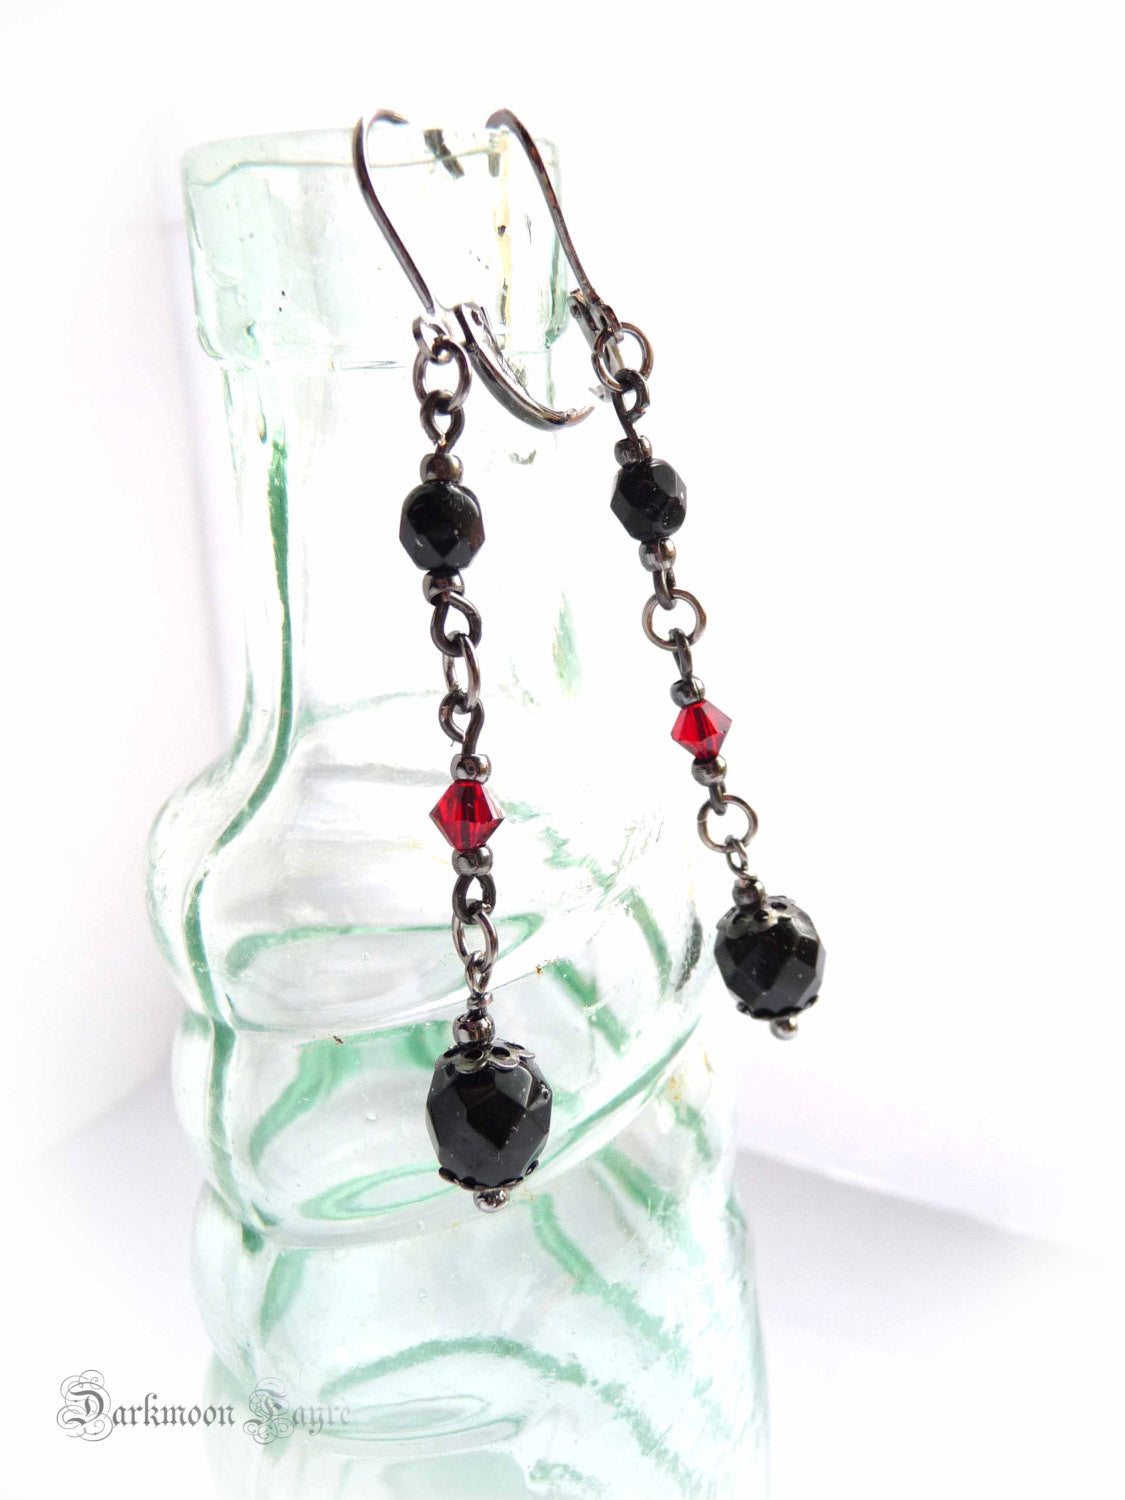 Victorian Vampire Earrings. Blood Red Swarovski Crystals, Black Czech Fire Polished Faceted Beads, Gunmetal Findings & Wire. - Darkmoon Fayre